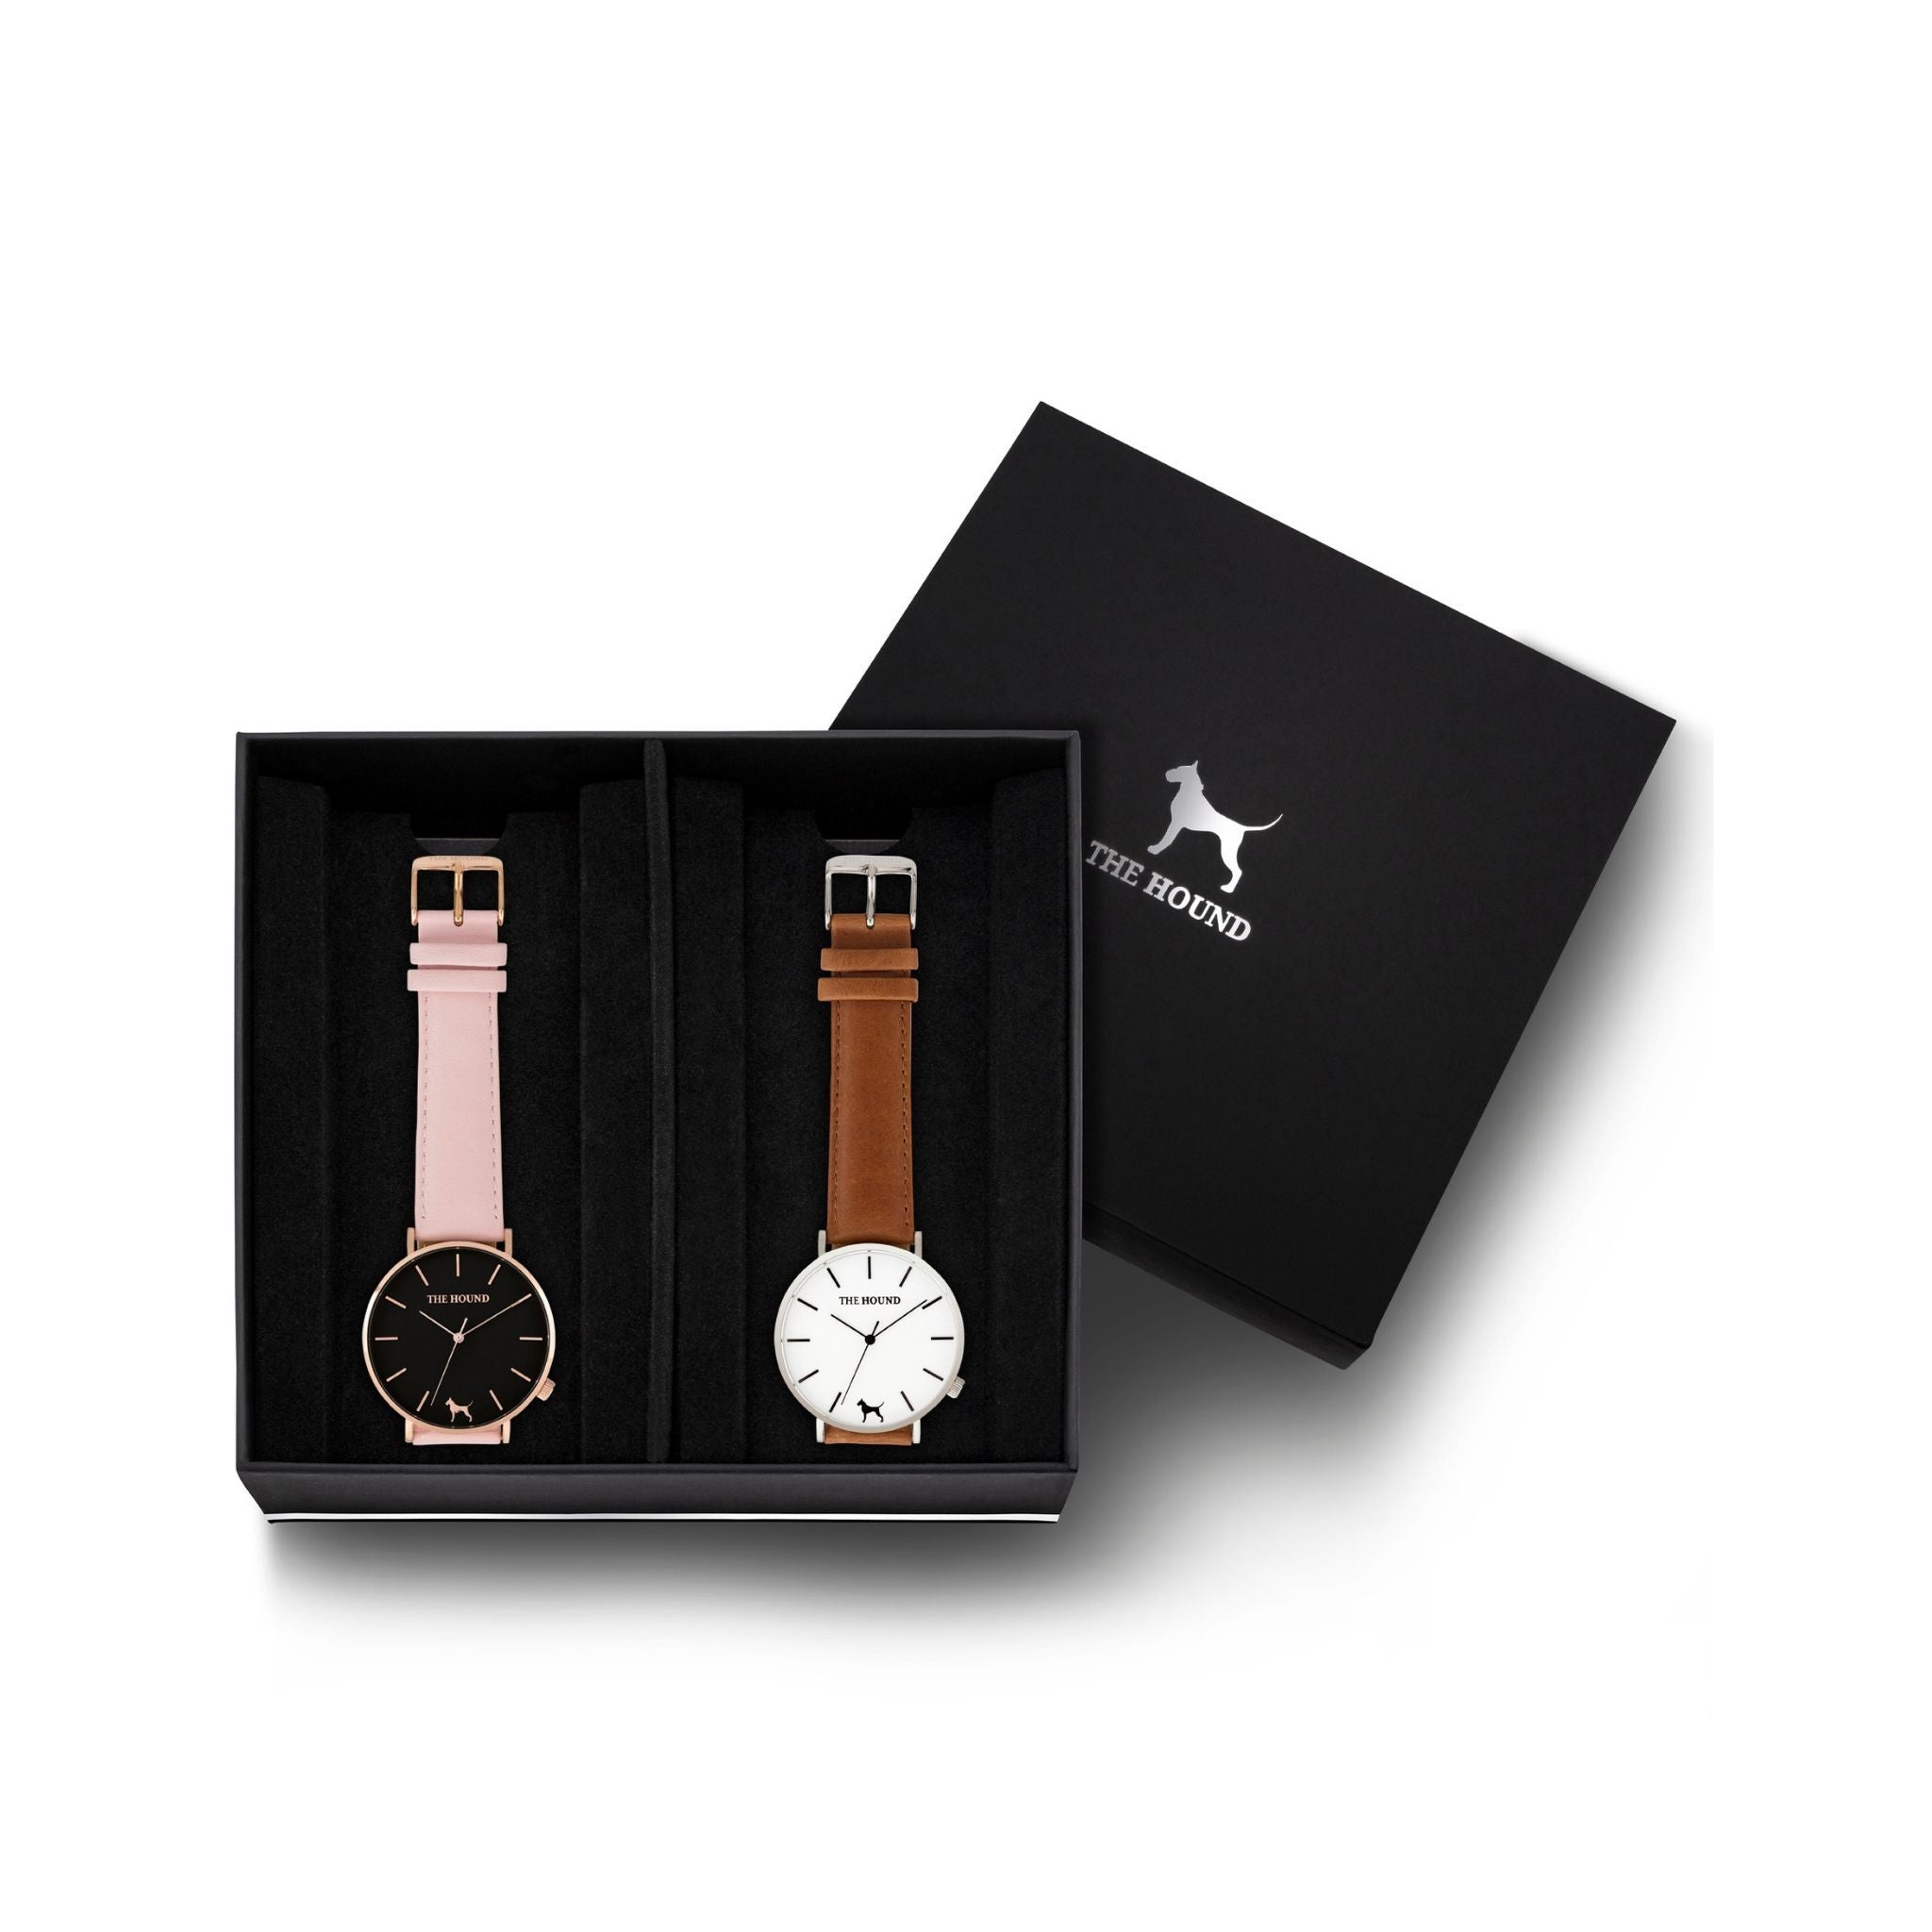 Custom gift set - Rose gold and black watch with stitched blush pink genuine leather band and a silver and white watch with stitched tan genuine leather band